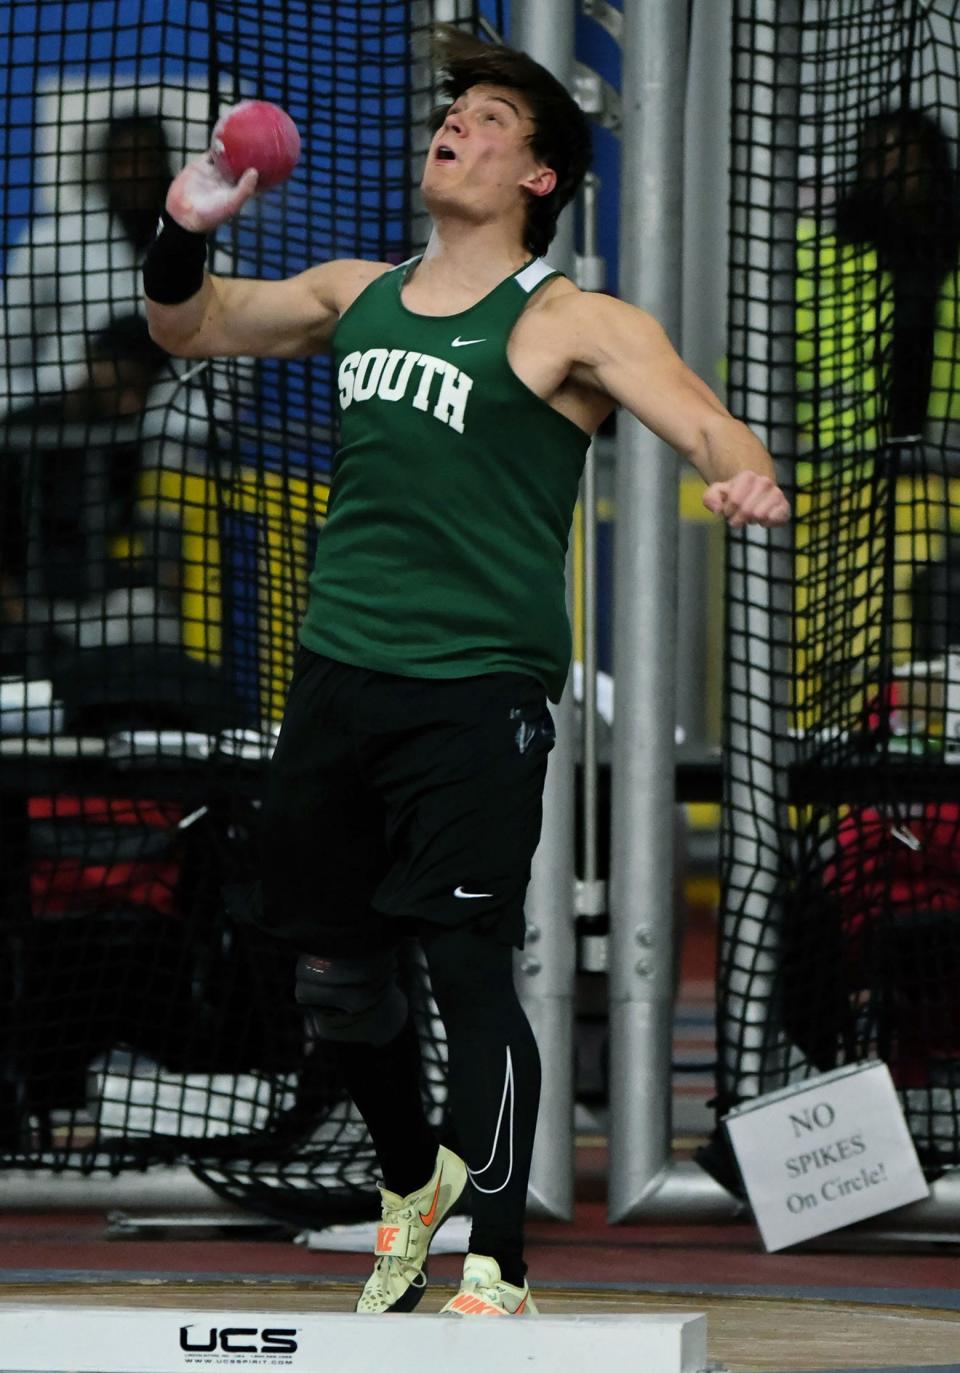 South Hagerstown's Ethan VanMeter throws the shot put 50 feet, 9 inches to win Class 3A gold during the Maryland Indoor Track and Field Championships on Wednesday.